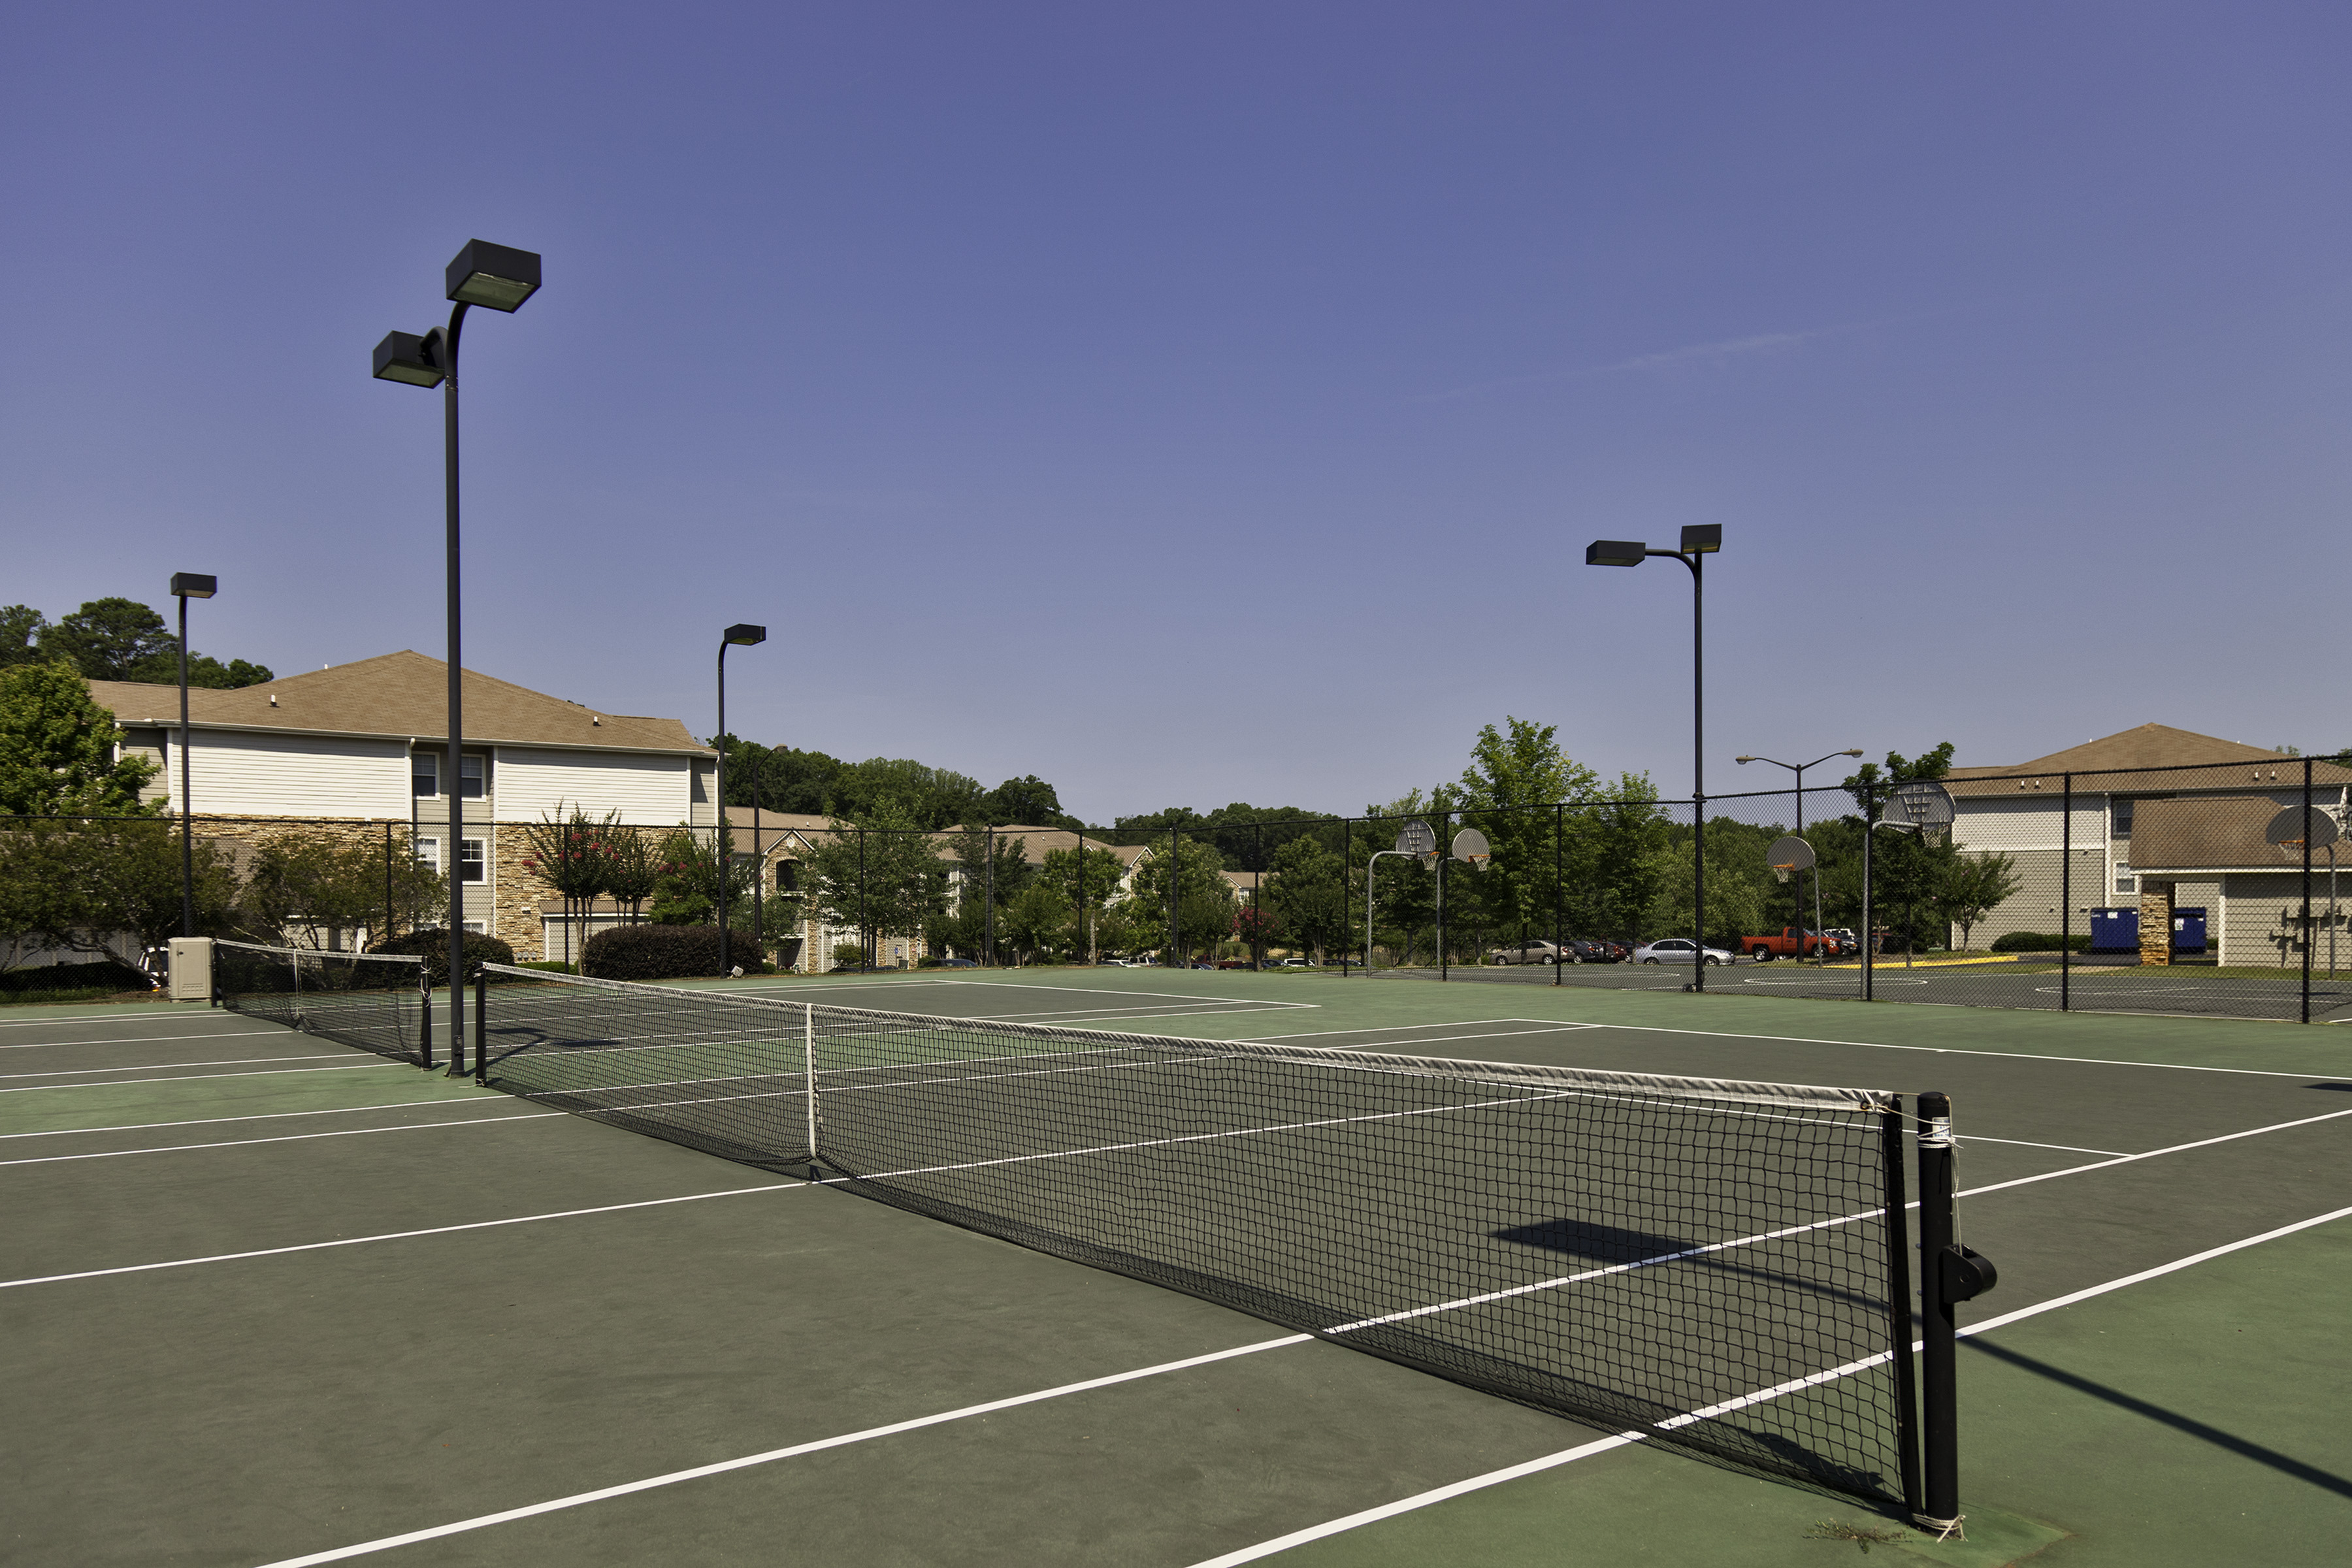 36 Top Pictures Reserve Tennis Courts Dc - 032_Tennis Courts_20499n98thPl - Homes for Sale & Real ...